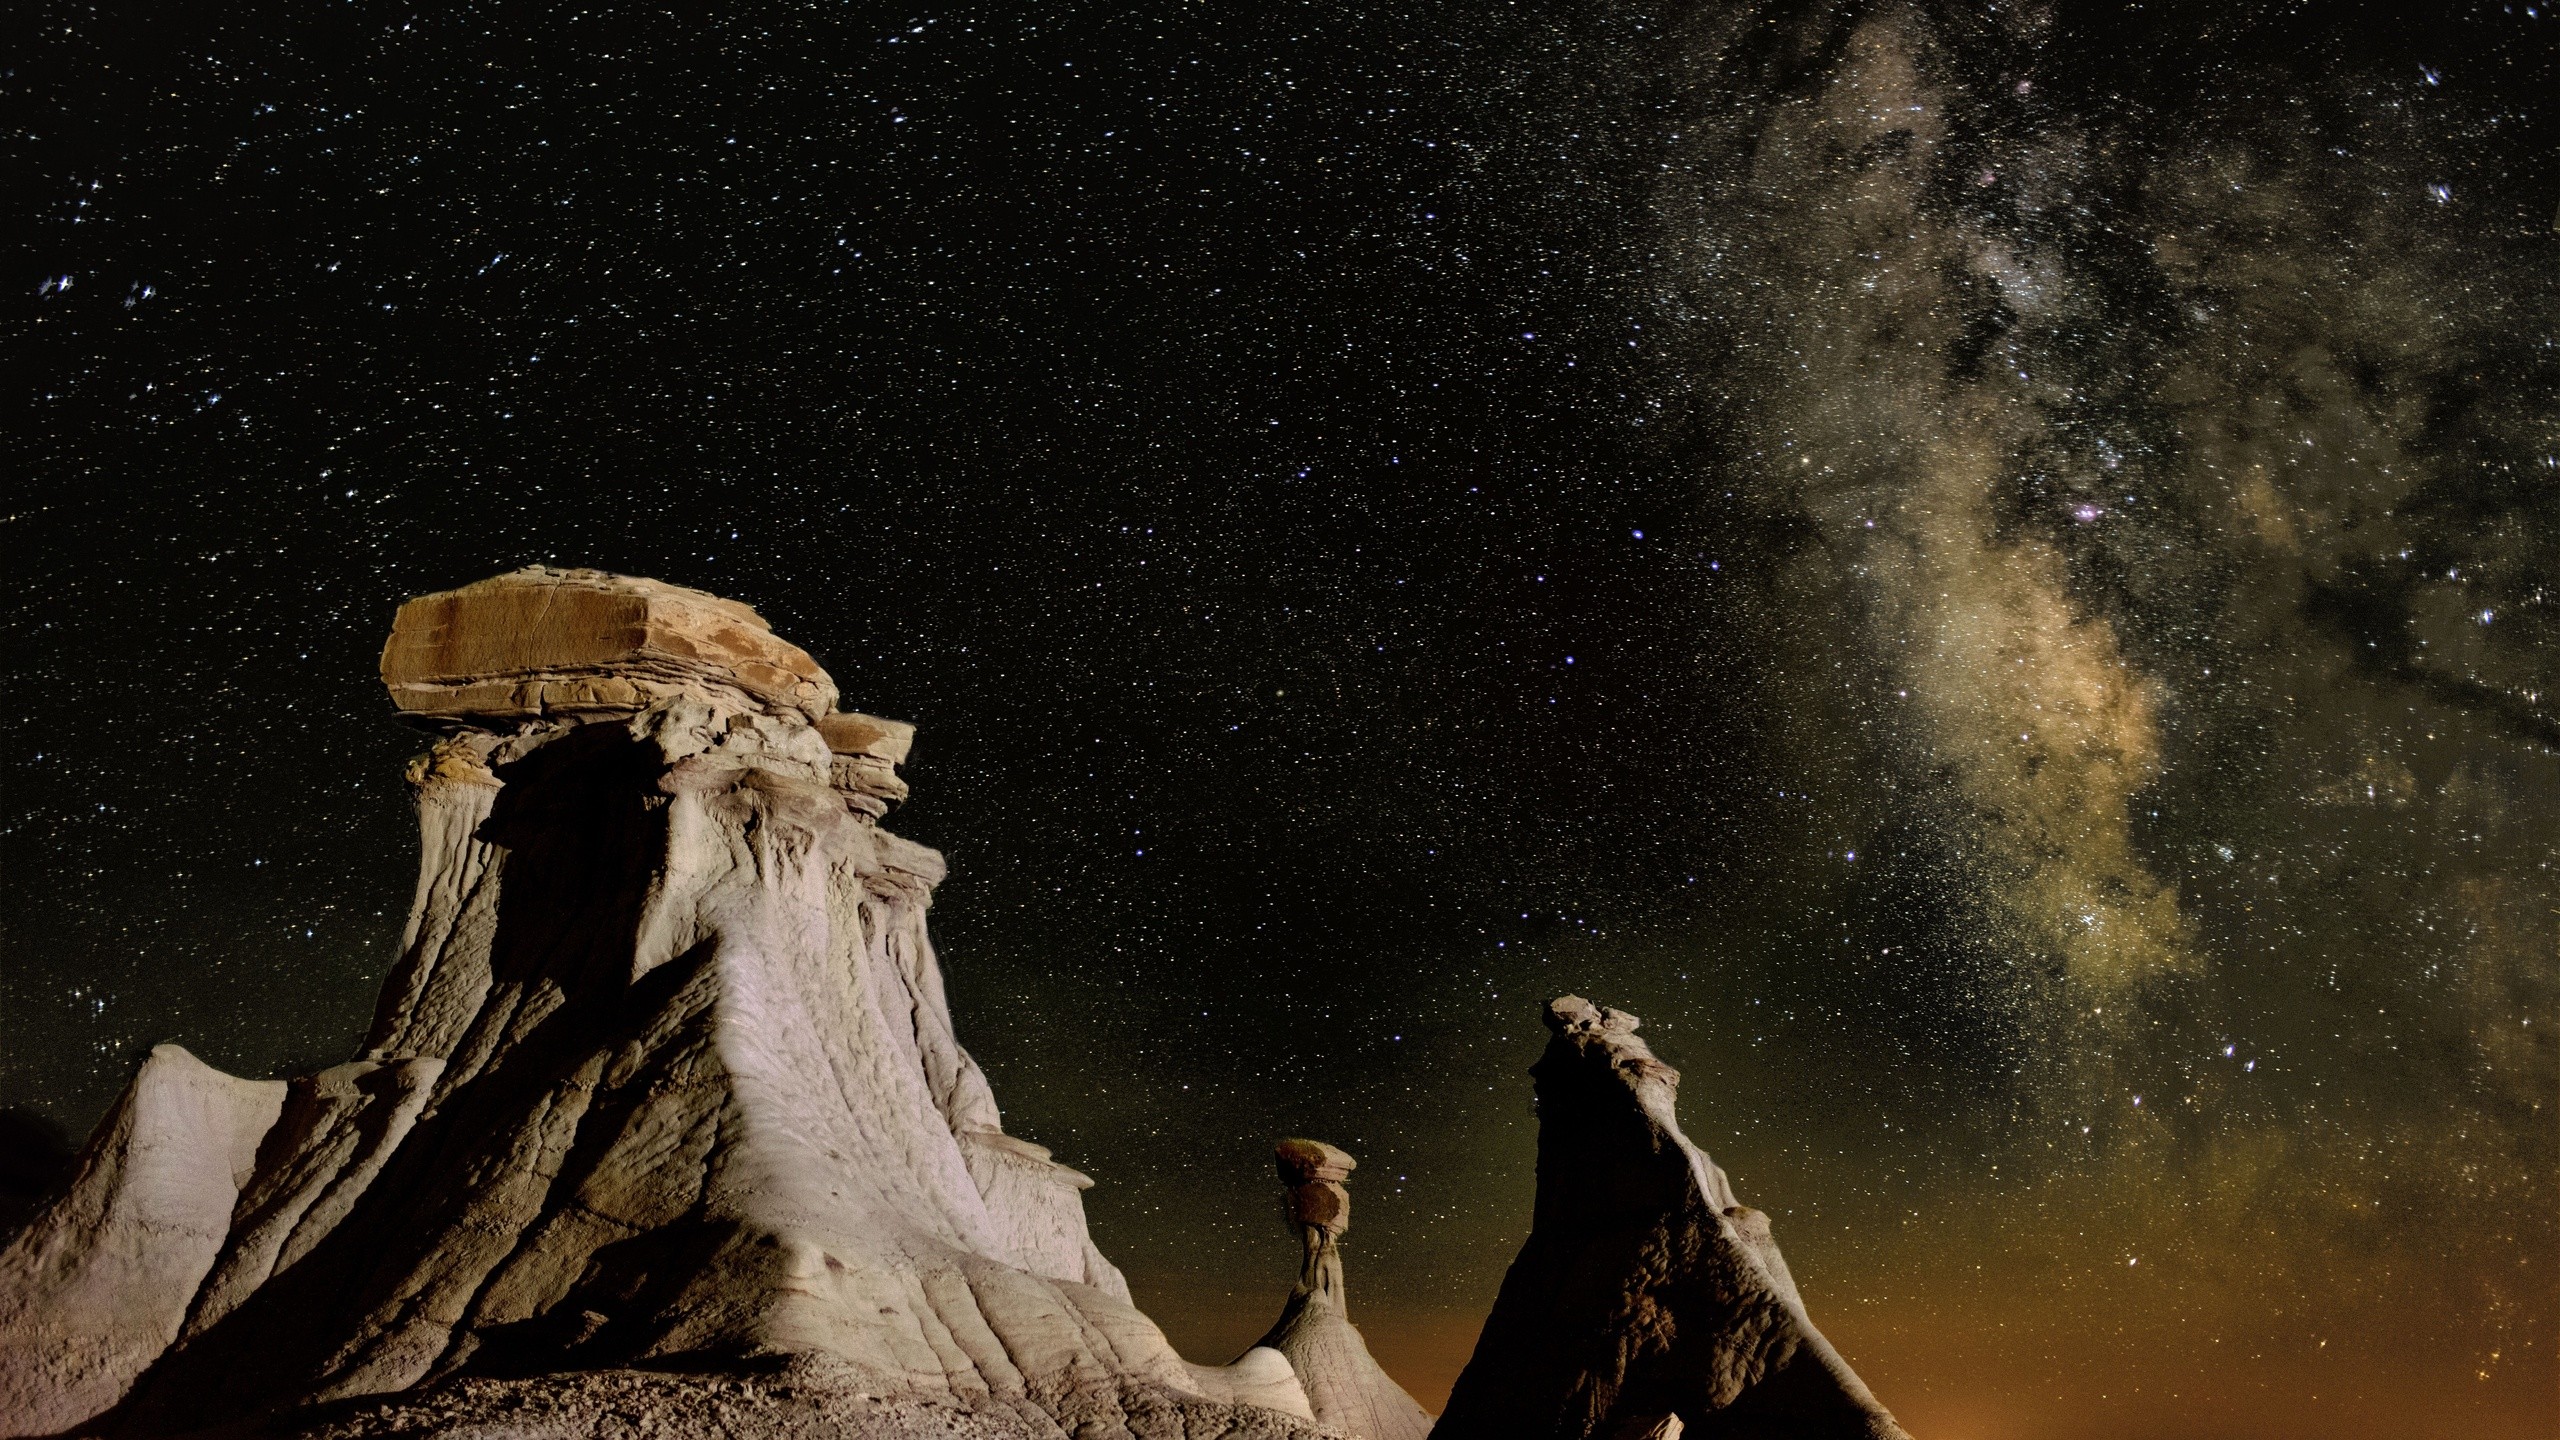 General 2560x1440 nature landscape mountains rocks sky night stars Milky Way shadow rock formation New Mexico USA desert